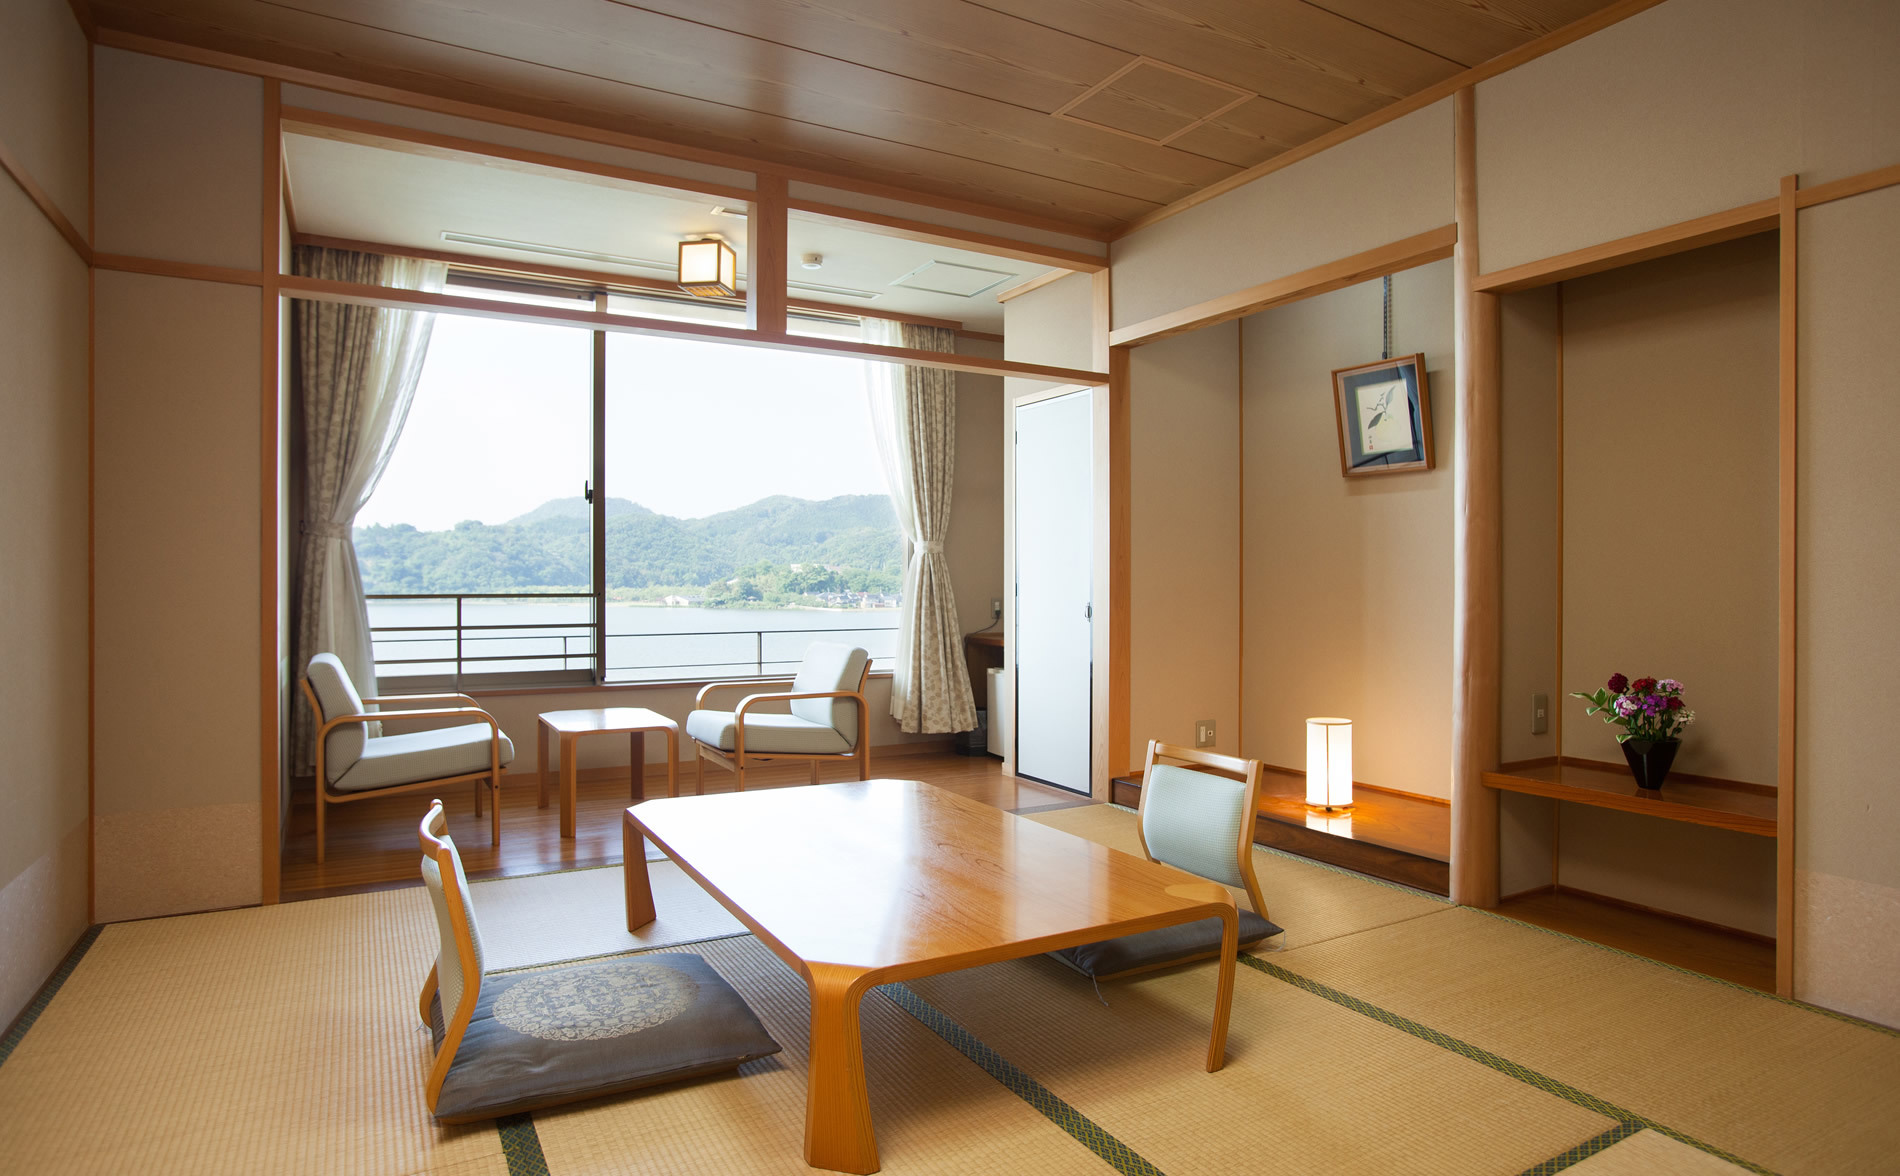 Togo Onsen Kokuminshukusya Suimeiso Togo Onsen Kokuminshukusya Suimeiso is conveniently located in the popular Yurihama area. The property features a wide range of facilities to make your stay a pleasant experience. Facilities for disab